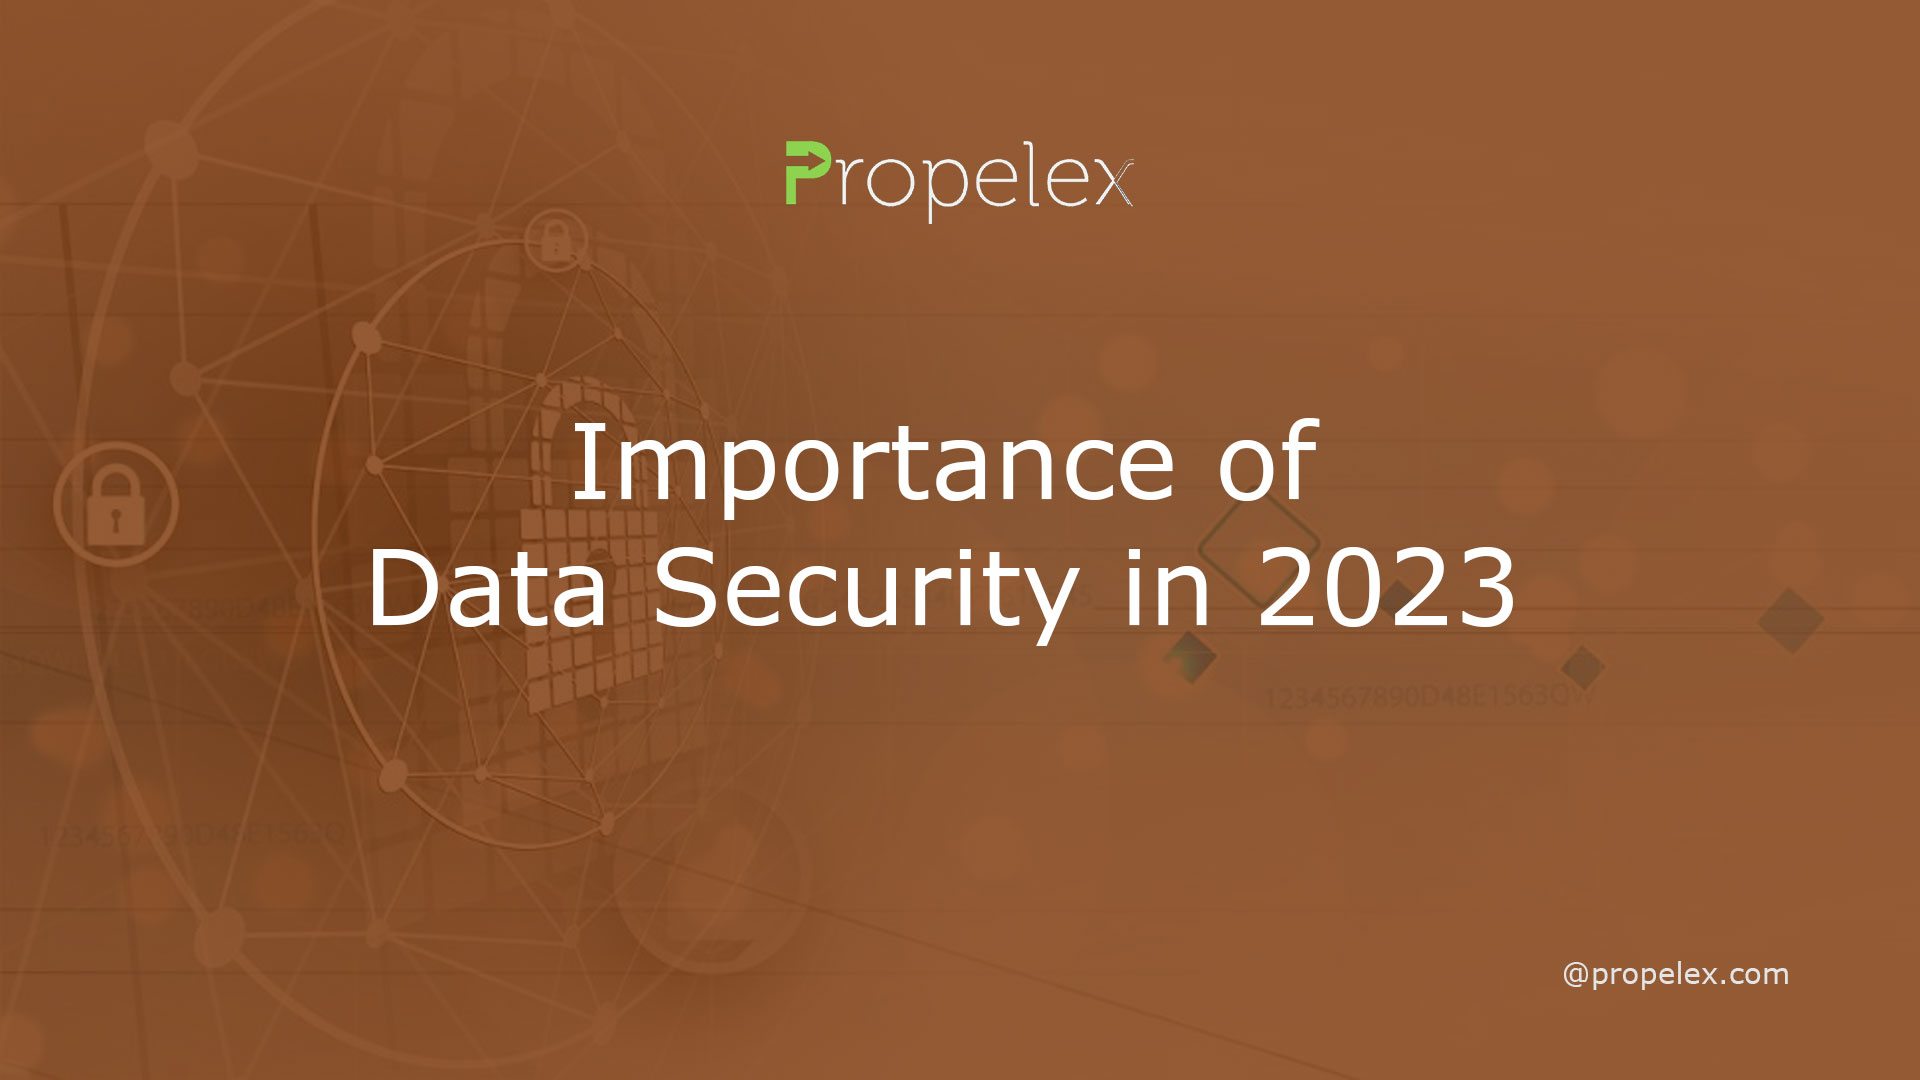 Importance of Data Security in 2023